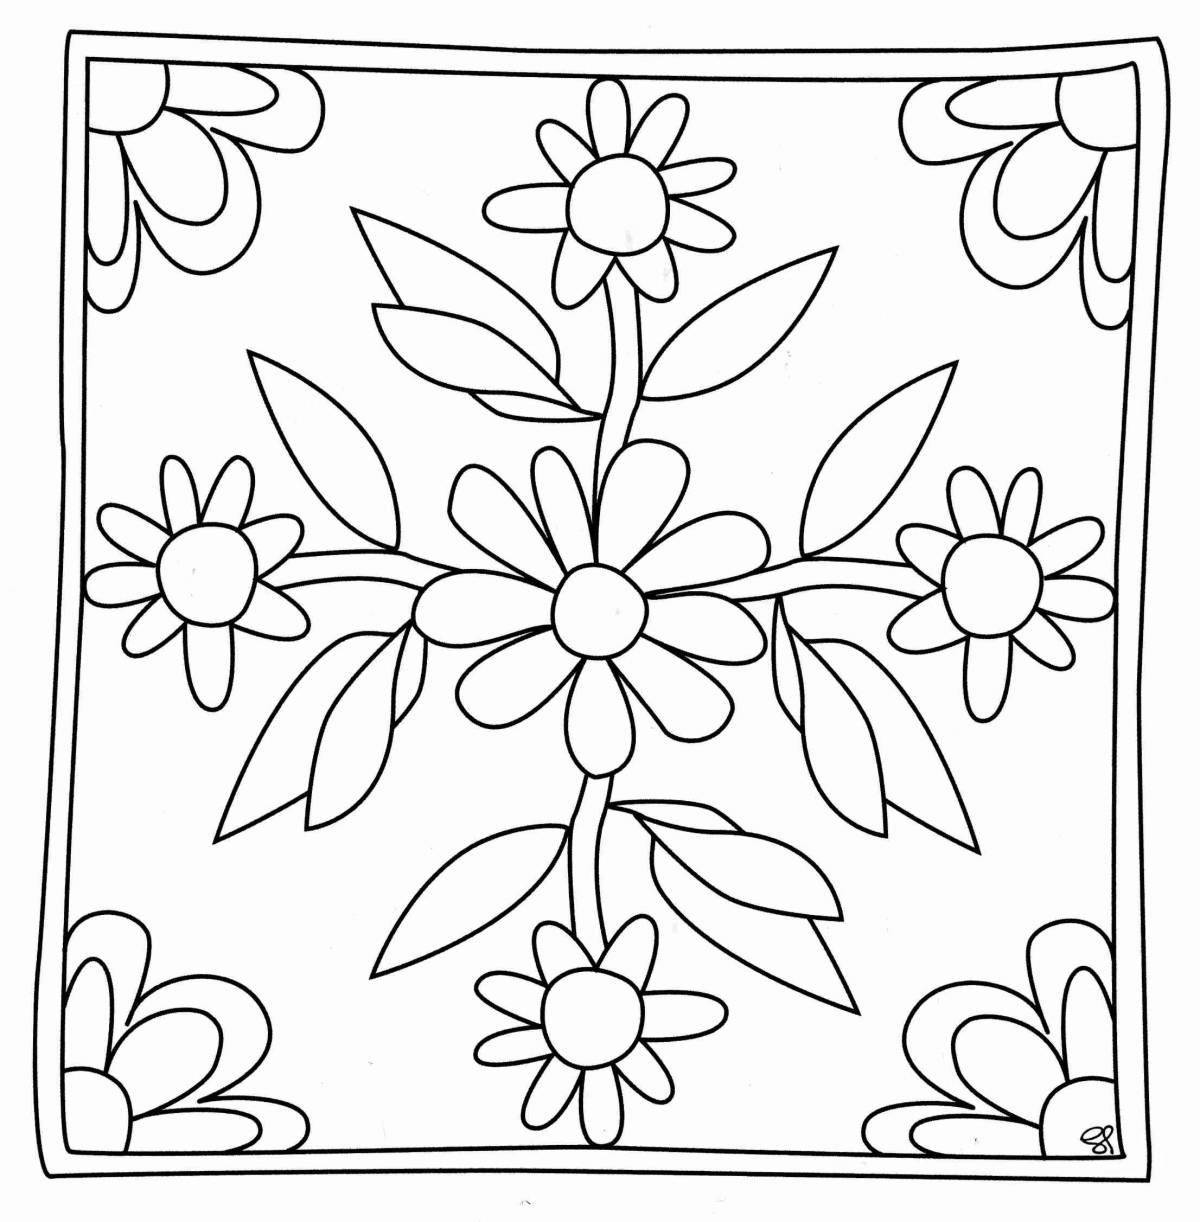 Coloring page charming pavloposadsky scarf